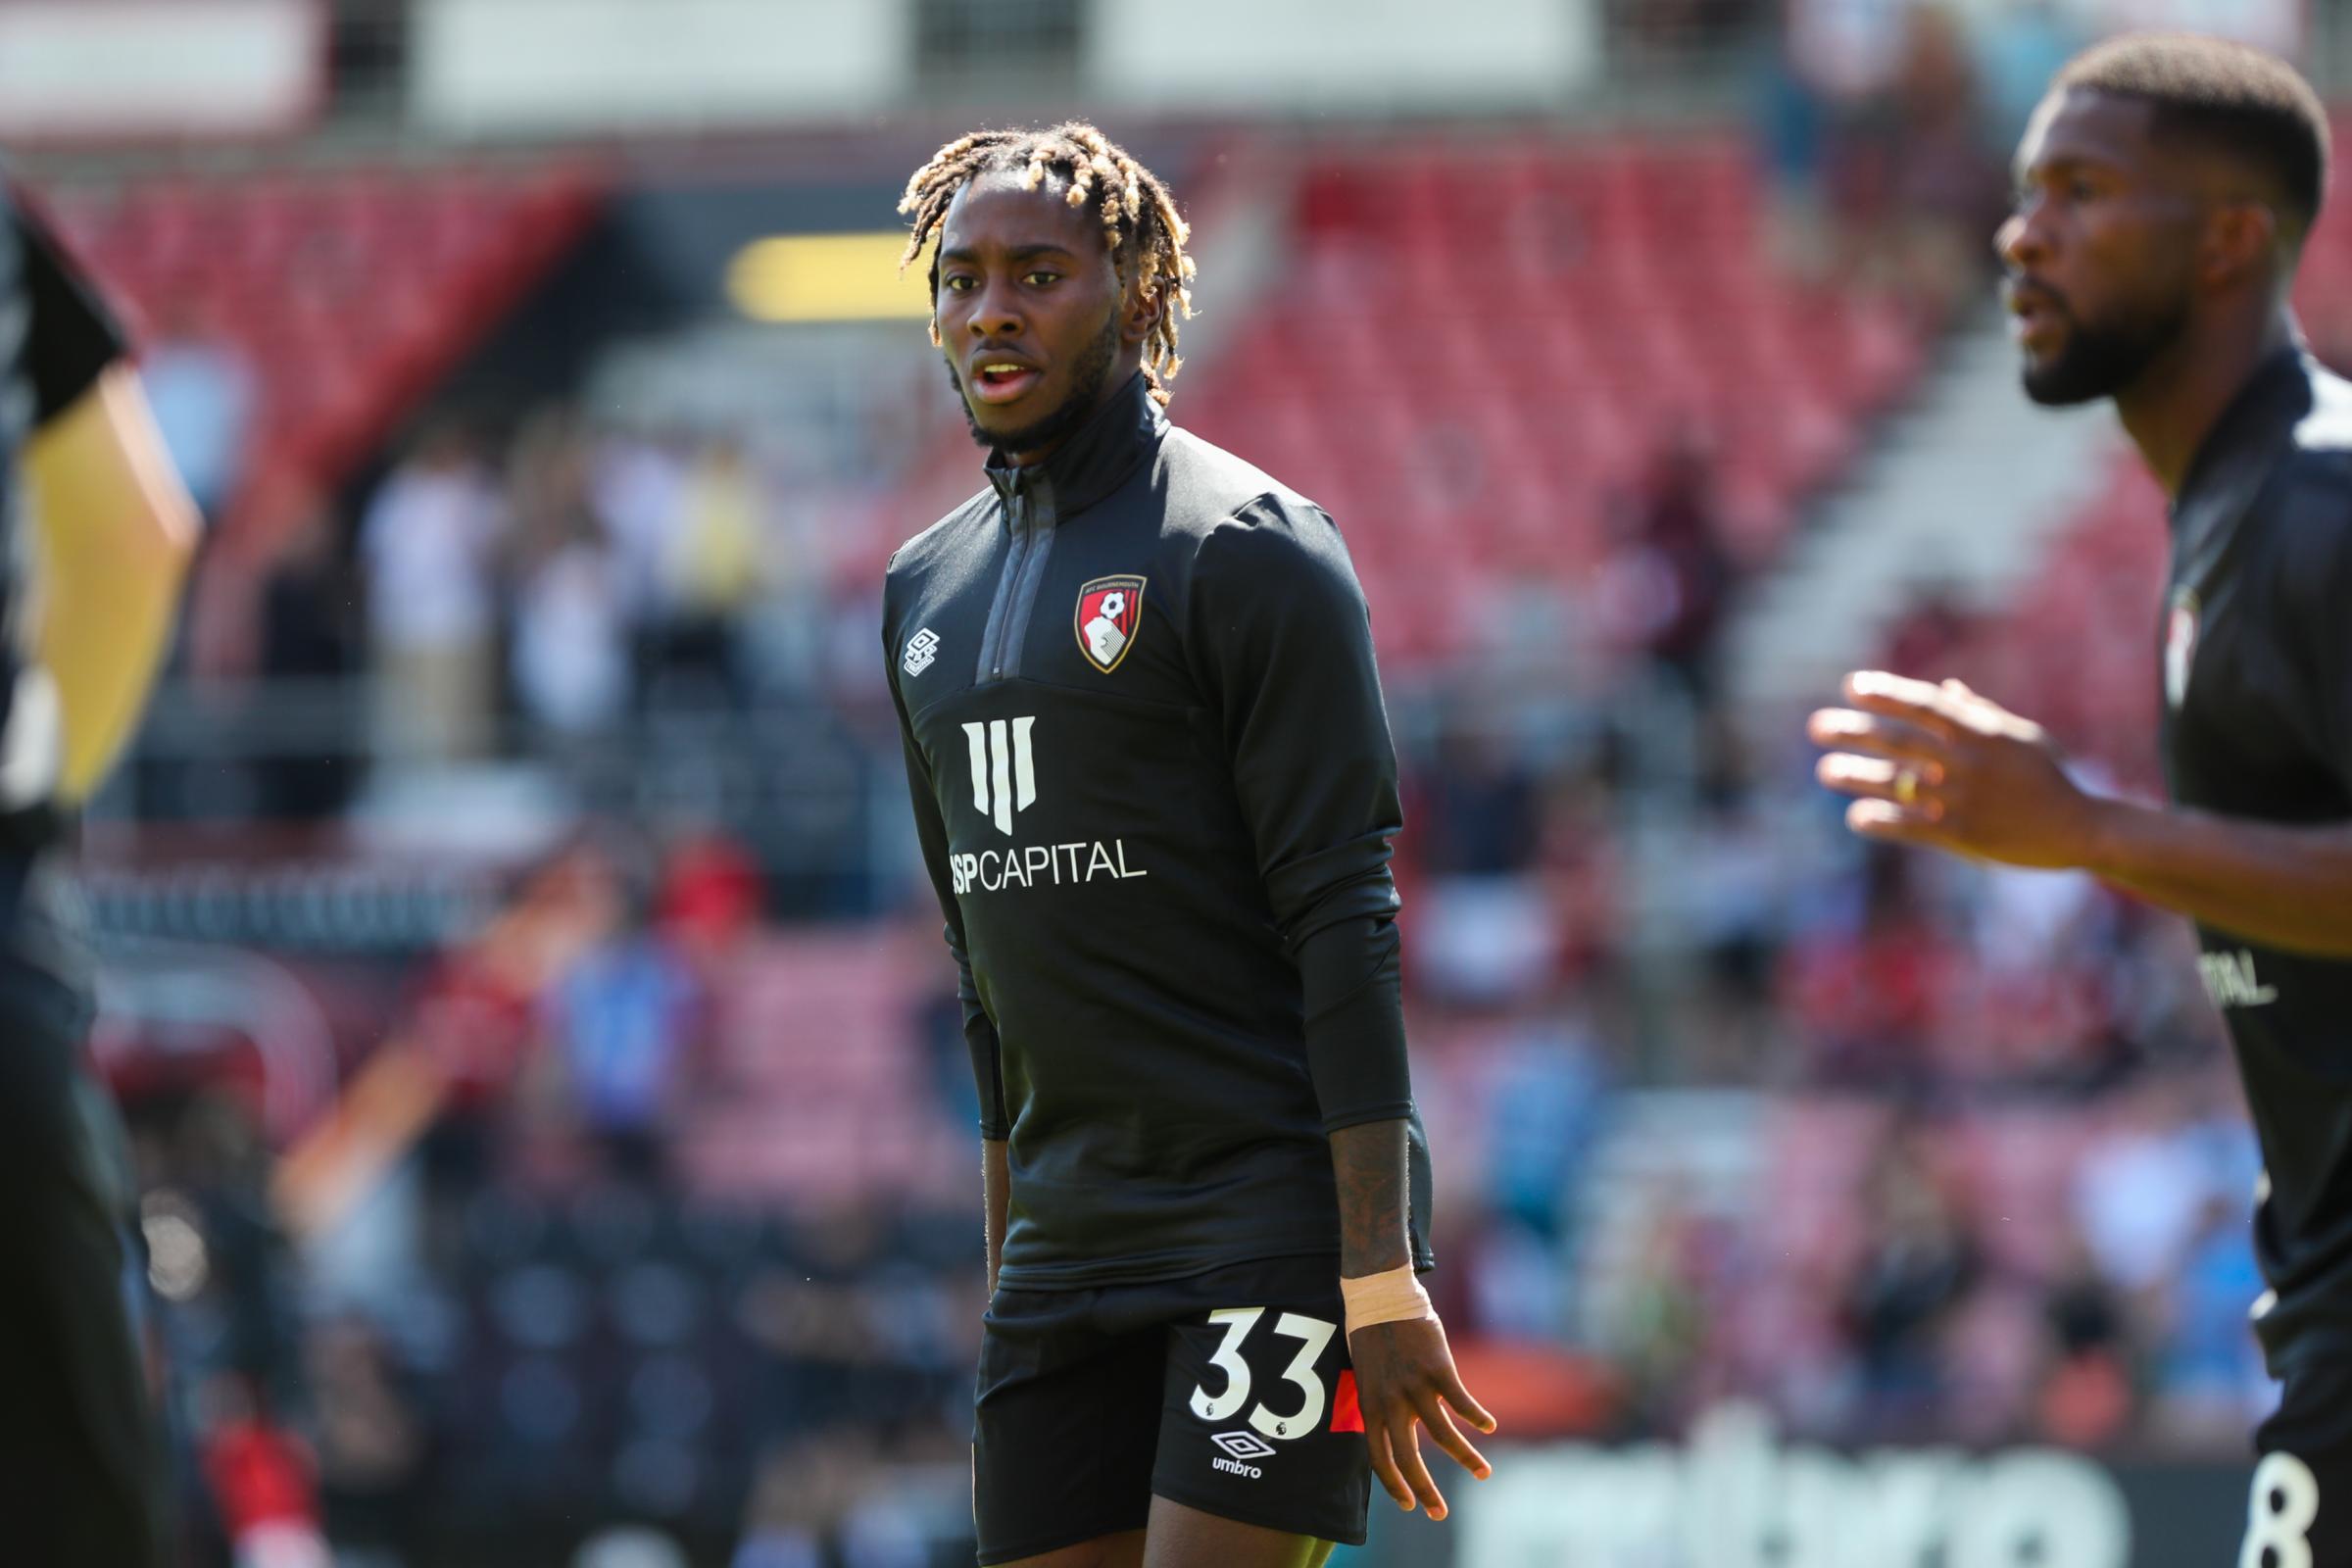 Zemura says 'I would like to continue this' when asked about staying at AFC Bournemouth